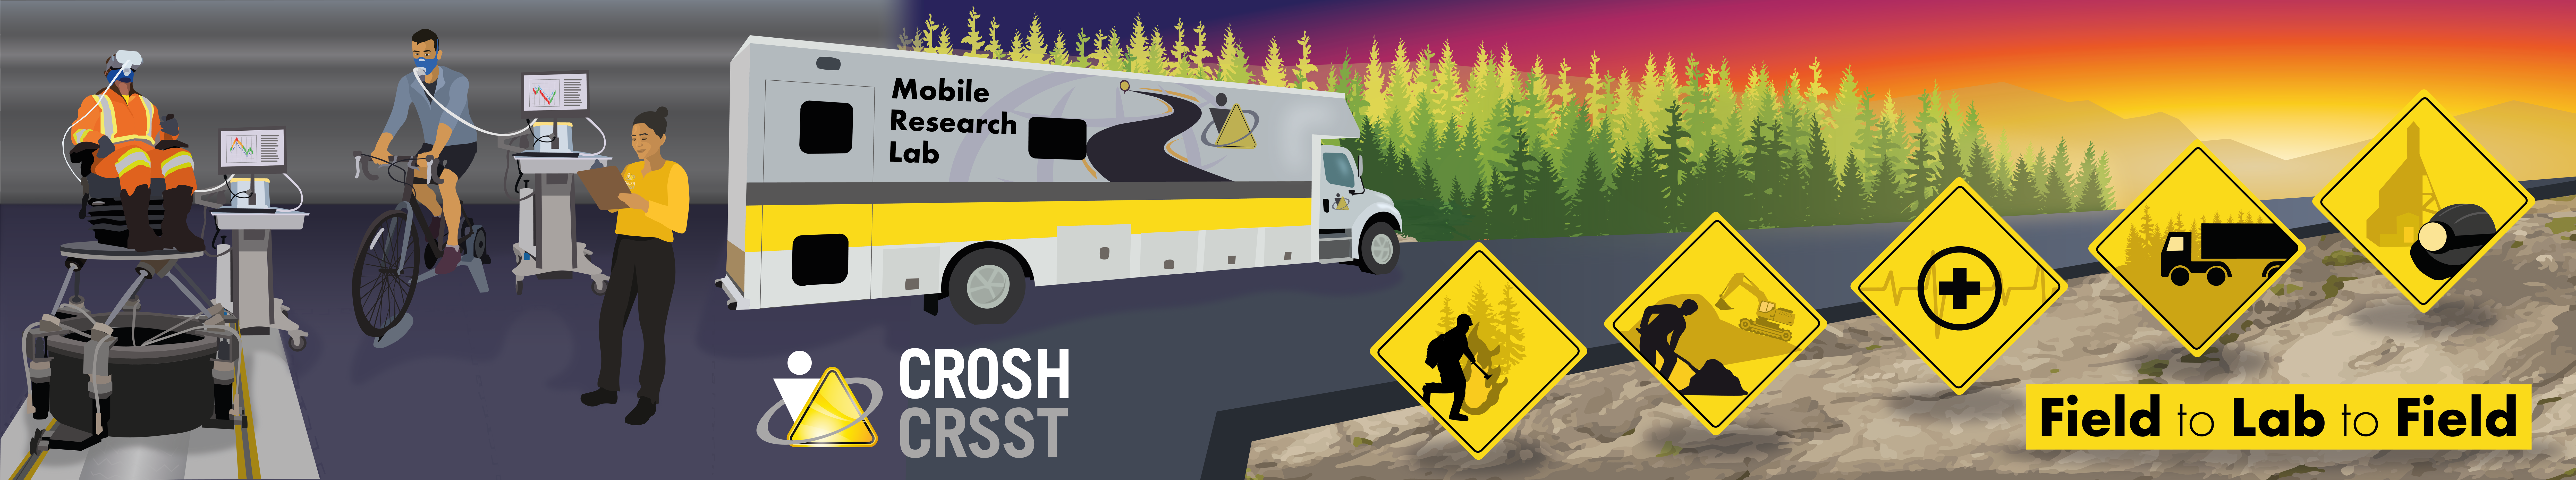 Illustration of the inside of the CROSH workplace simulator lab and the CROSH mobile research lab on a northern ontario road. Icons representing wildland firefighting, construction, healthcare, transportation, and mining. Text that reads "Field to Lab to Field"